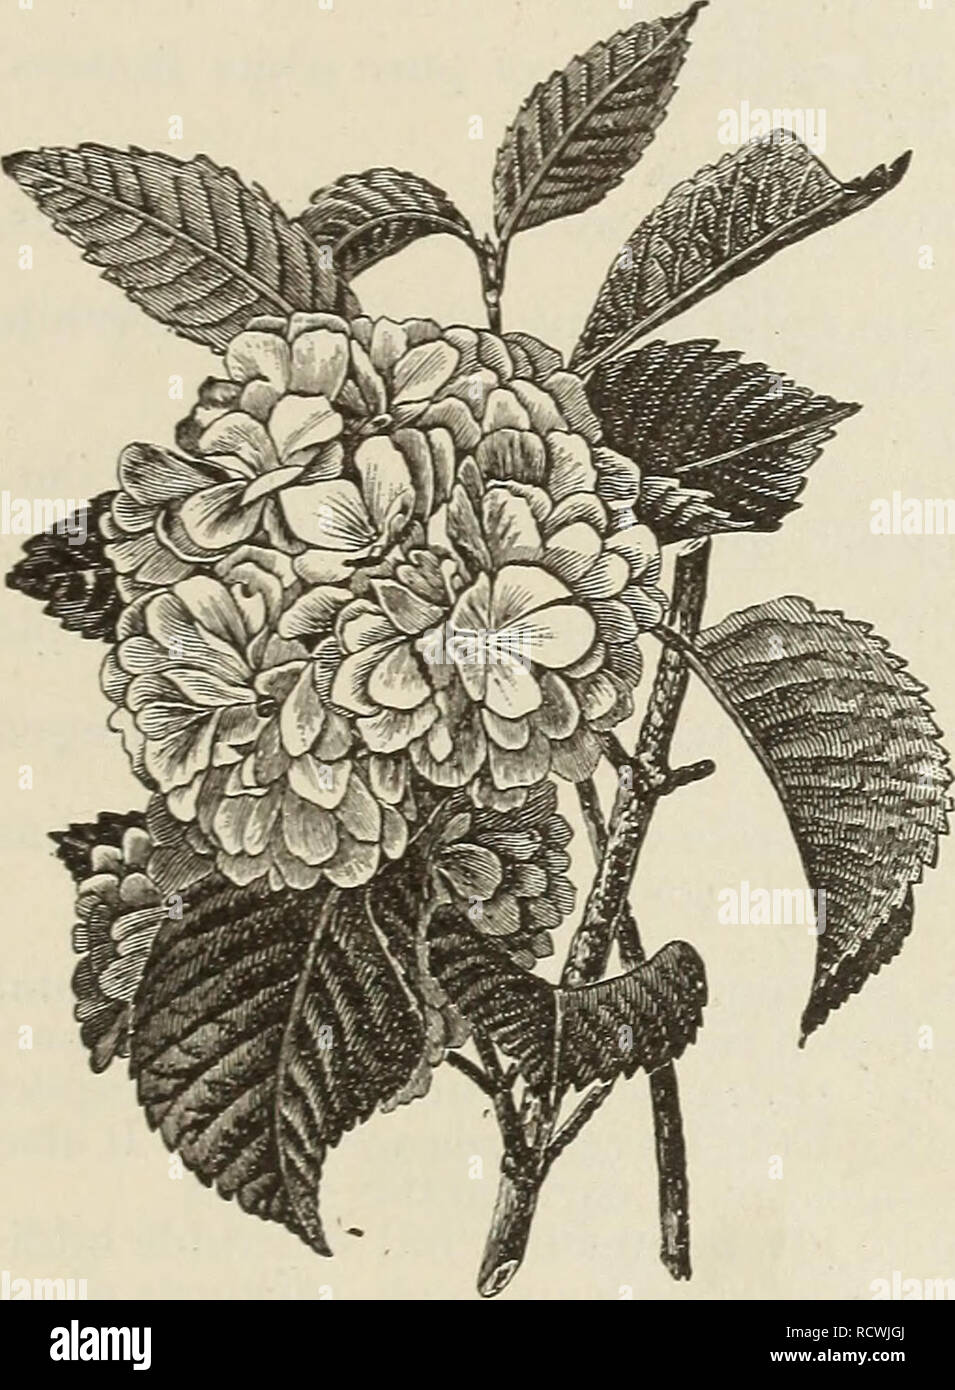 . Descriptive catalogue of fruit andornamental trees, shrubs, roses, etc.. Nurseries (Horticulture) New York (State) Catalogs; Fruit Catalogs; Trees Catalogs. /l.LrSTR.lTEn nESCRTPTU'E CATALOGUE Spirea. CALLOSA ALBA.—A white-flowering varieU&quot;, of dwarf habit; verv fine. DOl'BLE FLOWERING PLUM LEAVED {PnmifoHa fl. pl)—V^ry beauti- ful ; its flowers are hke white daisies ; from Japan. Blooms m May. DOUGLASI (Doug:las' SpireT?a)—Has spikes of beautiful deep rose-colored flow- ers in Uilv and August. EXIMEA—Flowers bright rose color. July. One of the best. ELM LEAVED {CYmi/'olia)—Leaves somew Stock Photo